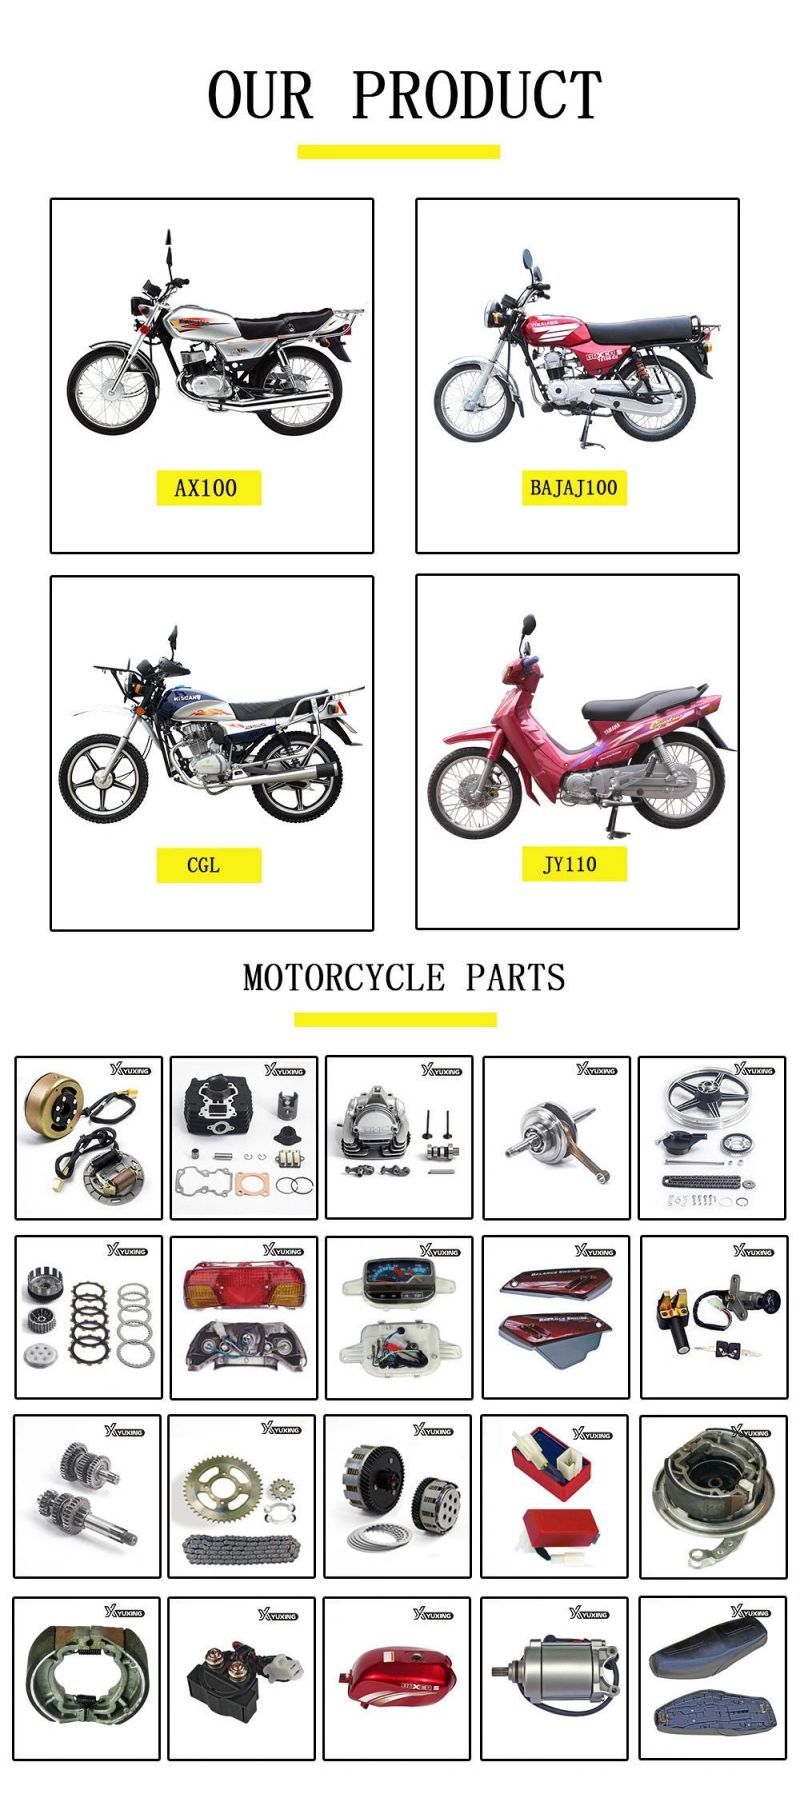 Yuxing Motorcycle Spare Parts Maintenance-Free 12n6.5-BS 12V6.5ah Motorcycle Battery for Motorbike